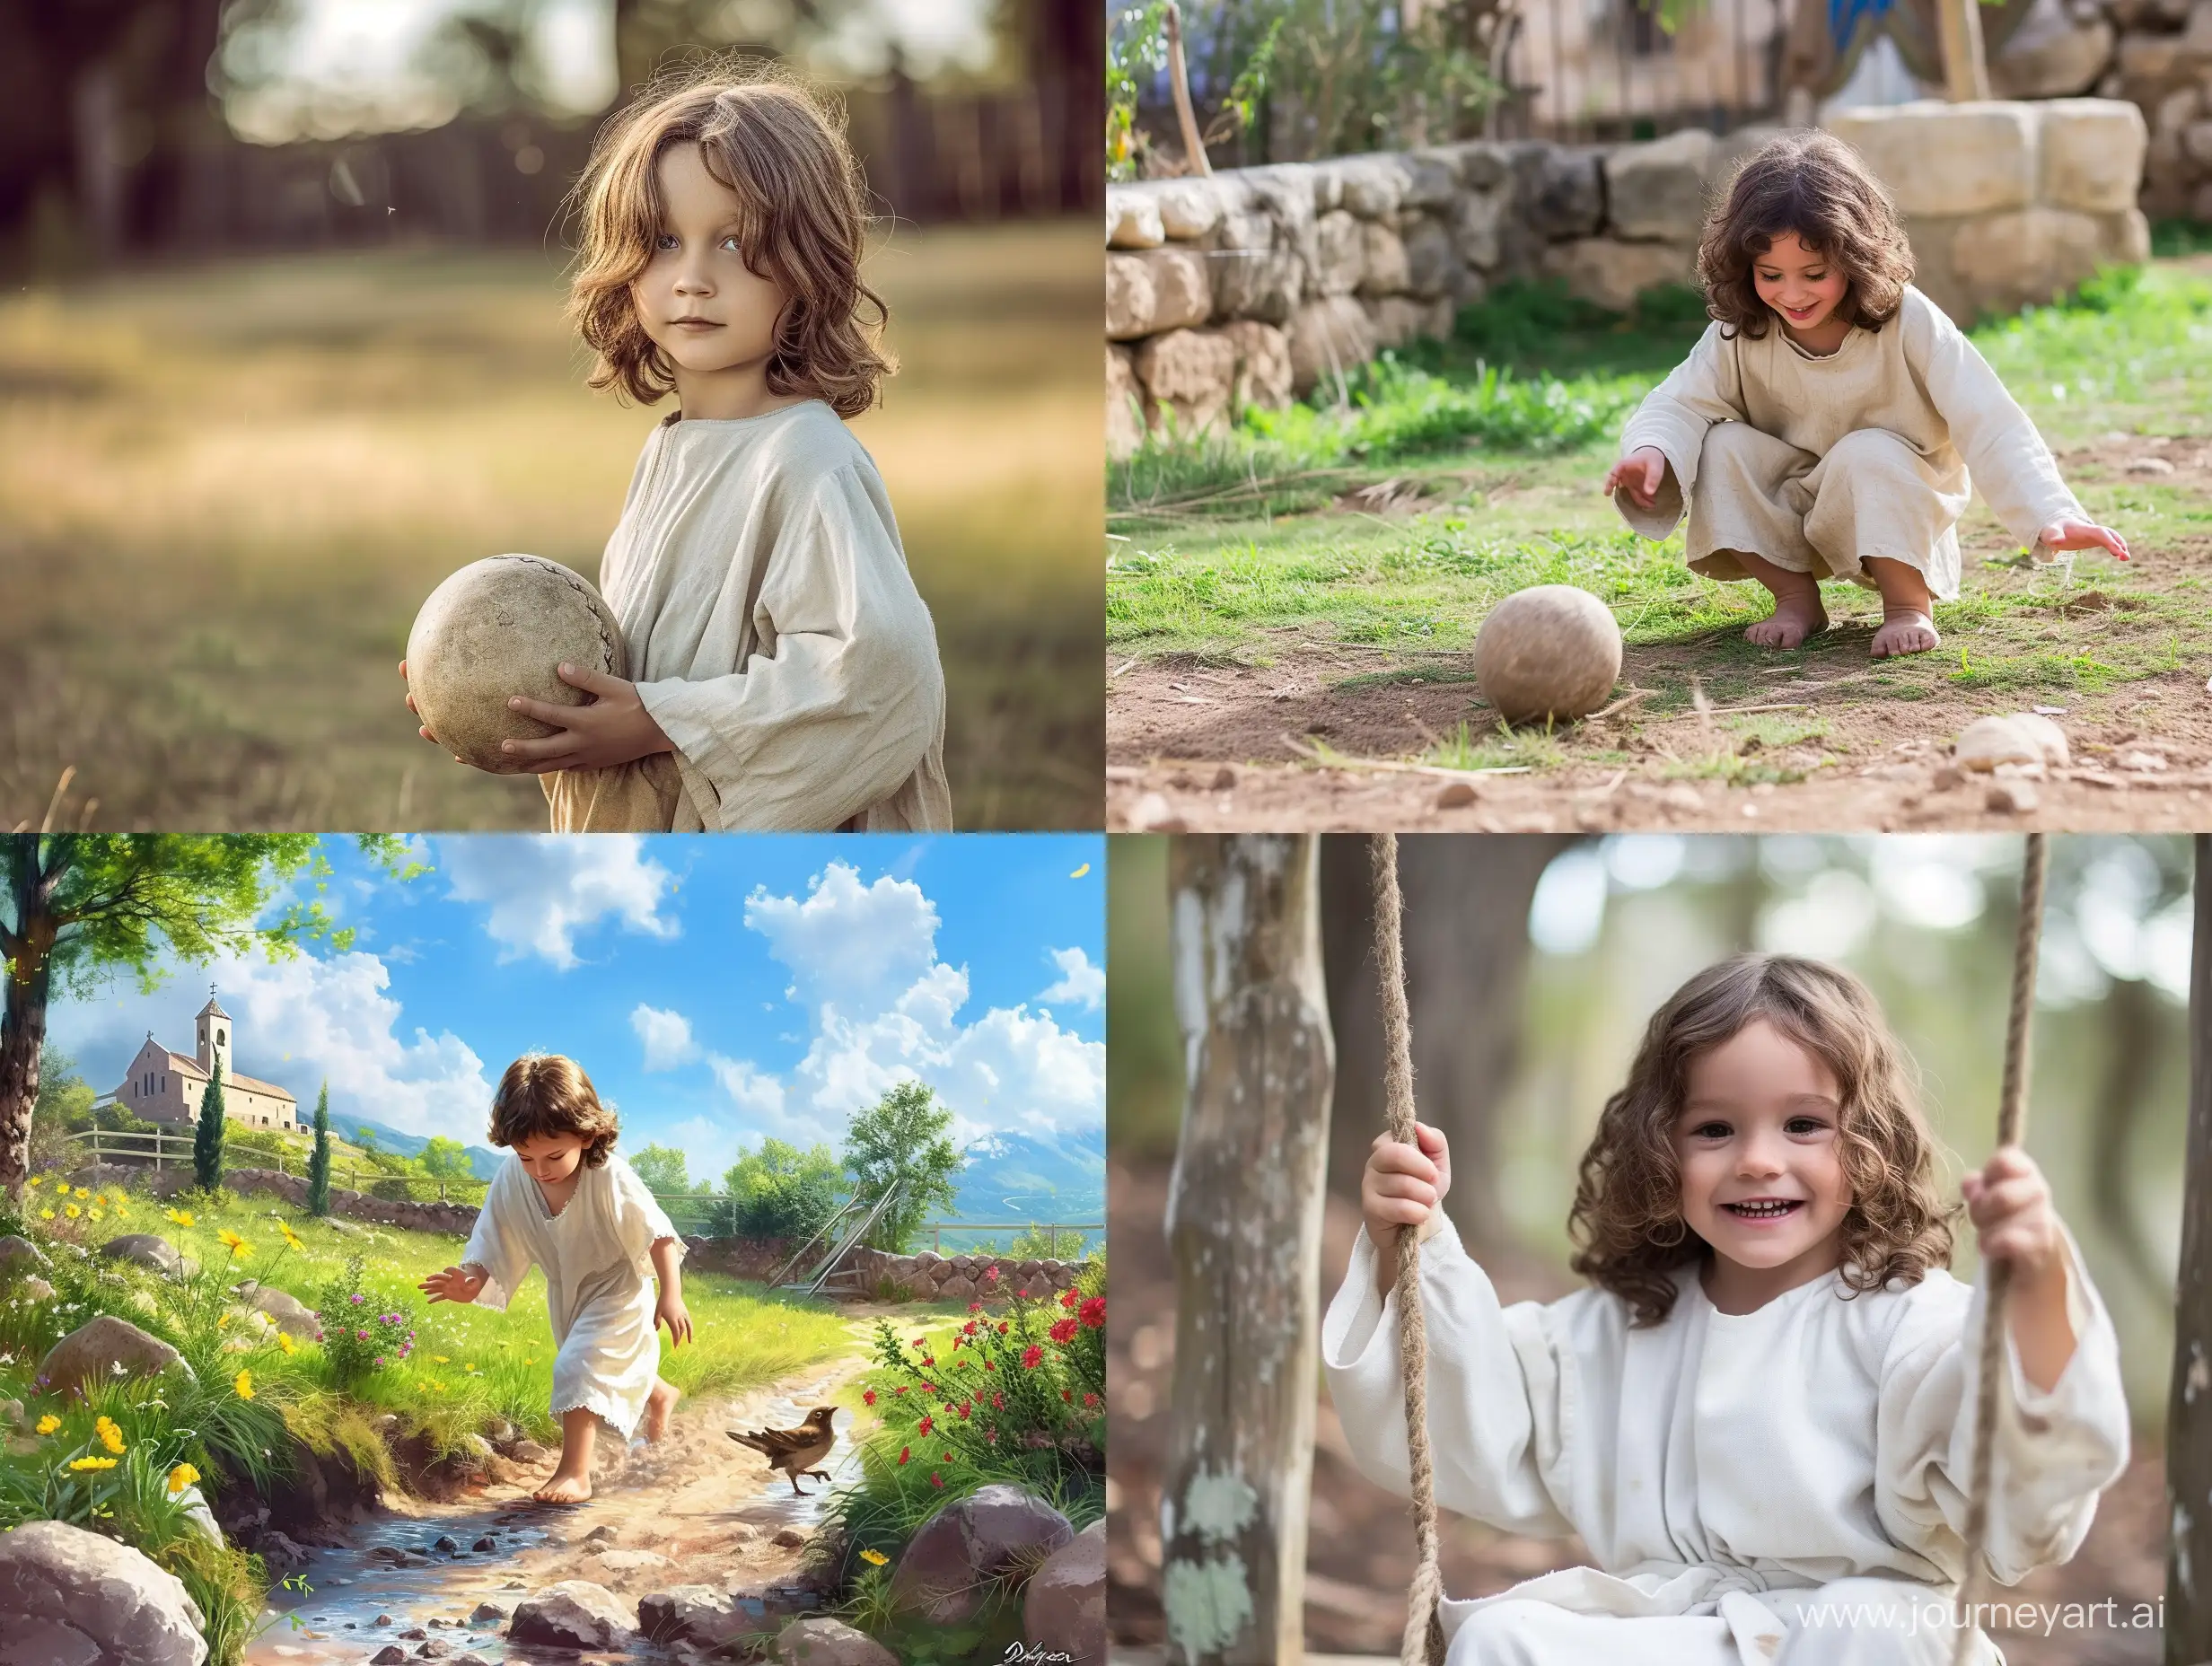 Jesus as a kid playing outdoor